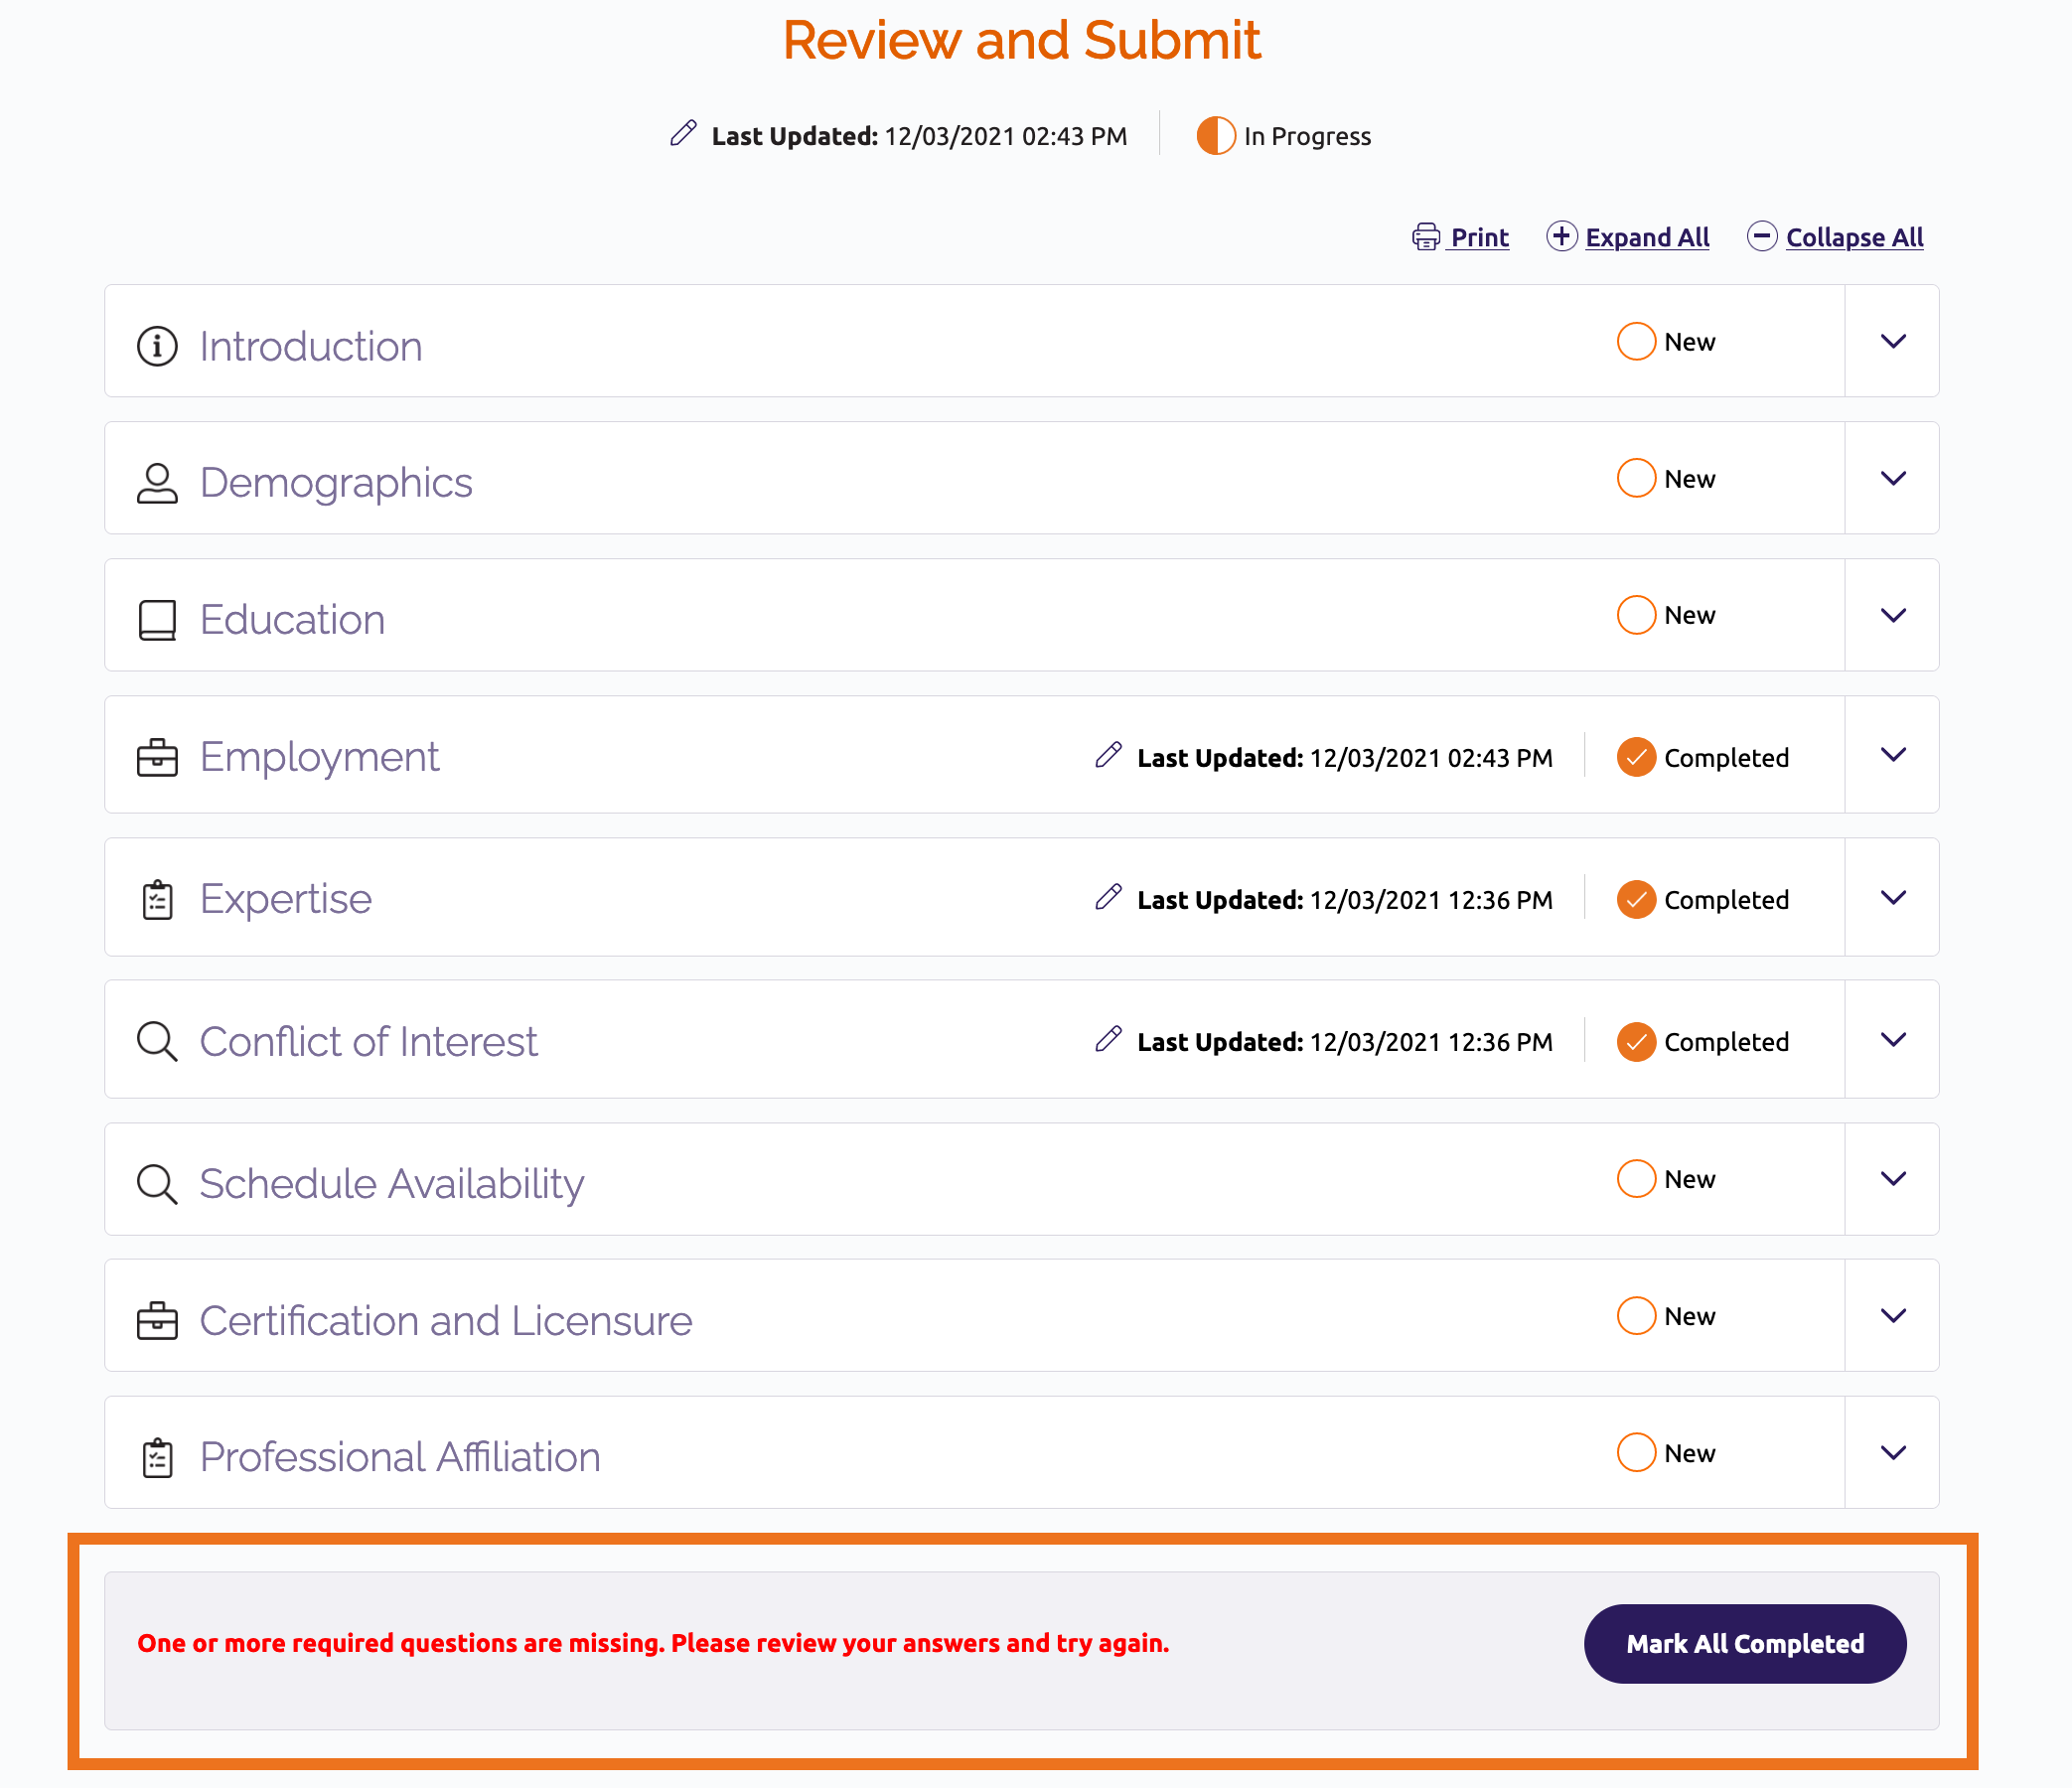 Review and Submit section page